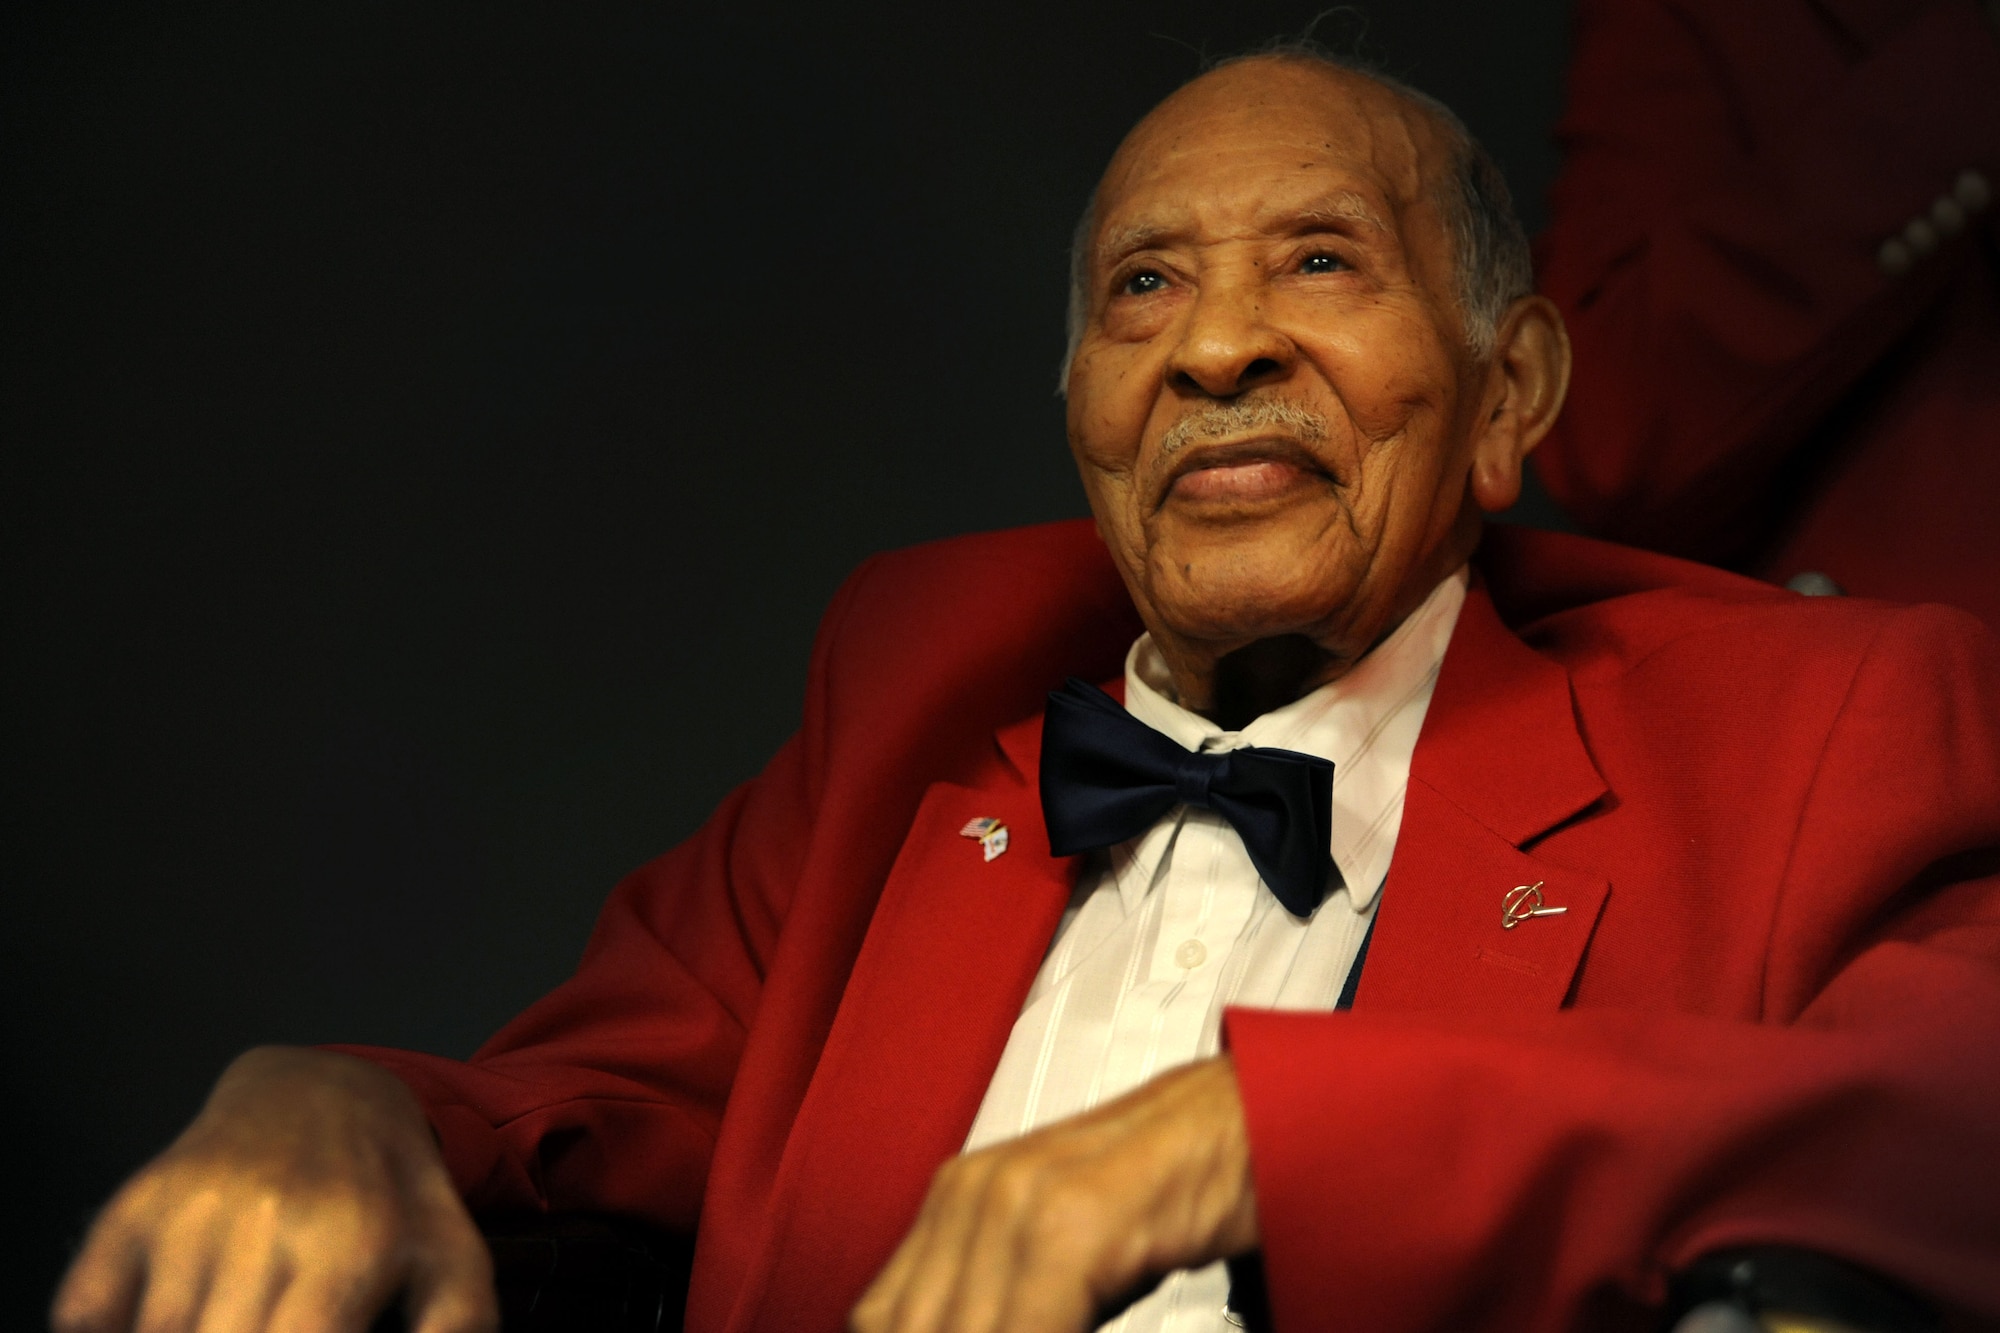 Tuskegee Airman Edward Gibson smiles for the camera at Joint Base Charleston - Air Base Feb. 16. Gibson served in the Army Air Corps as a bombardier-navigator and logged 2,300 flight hours.  (U.S. Air Force photo/Airman 1st Class Ashlee Galloway)